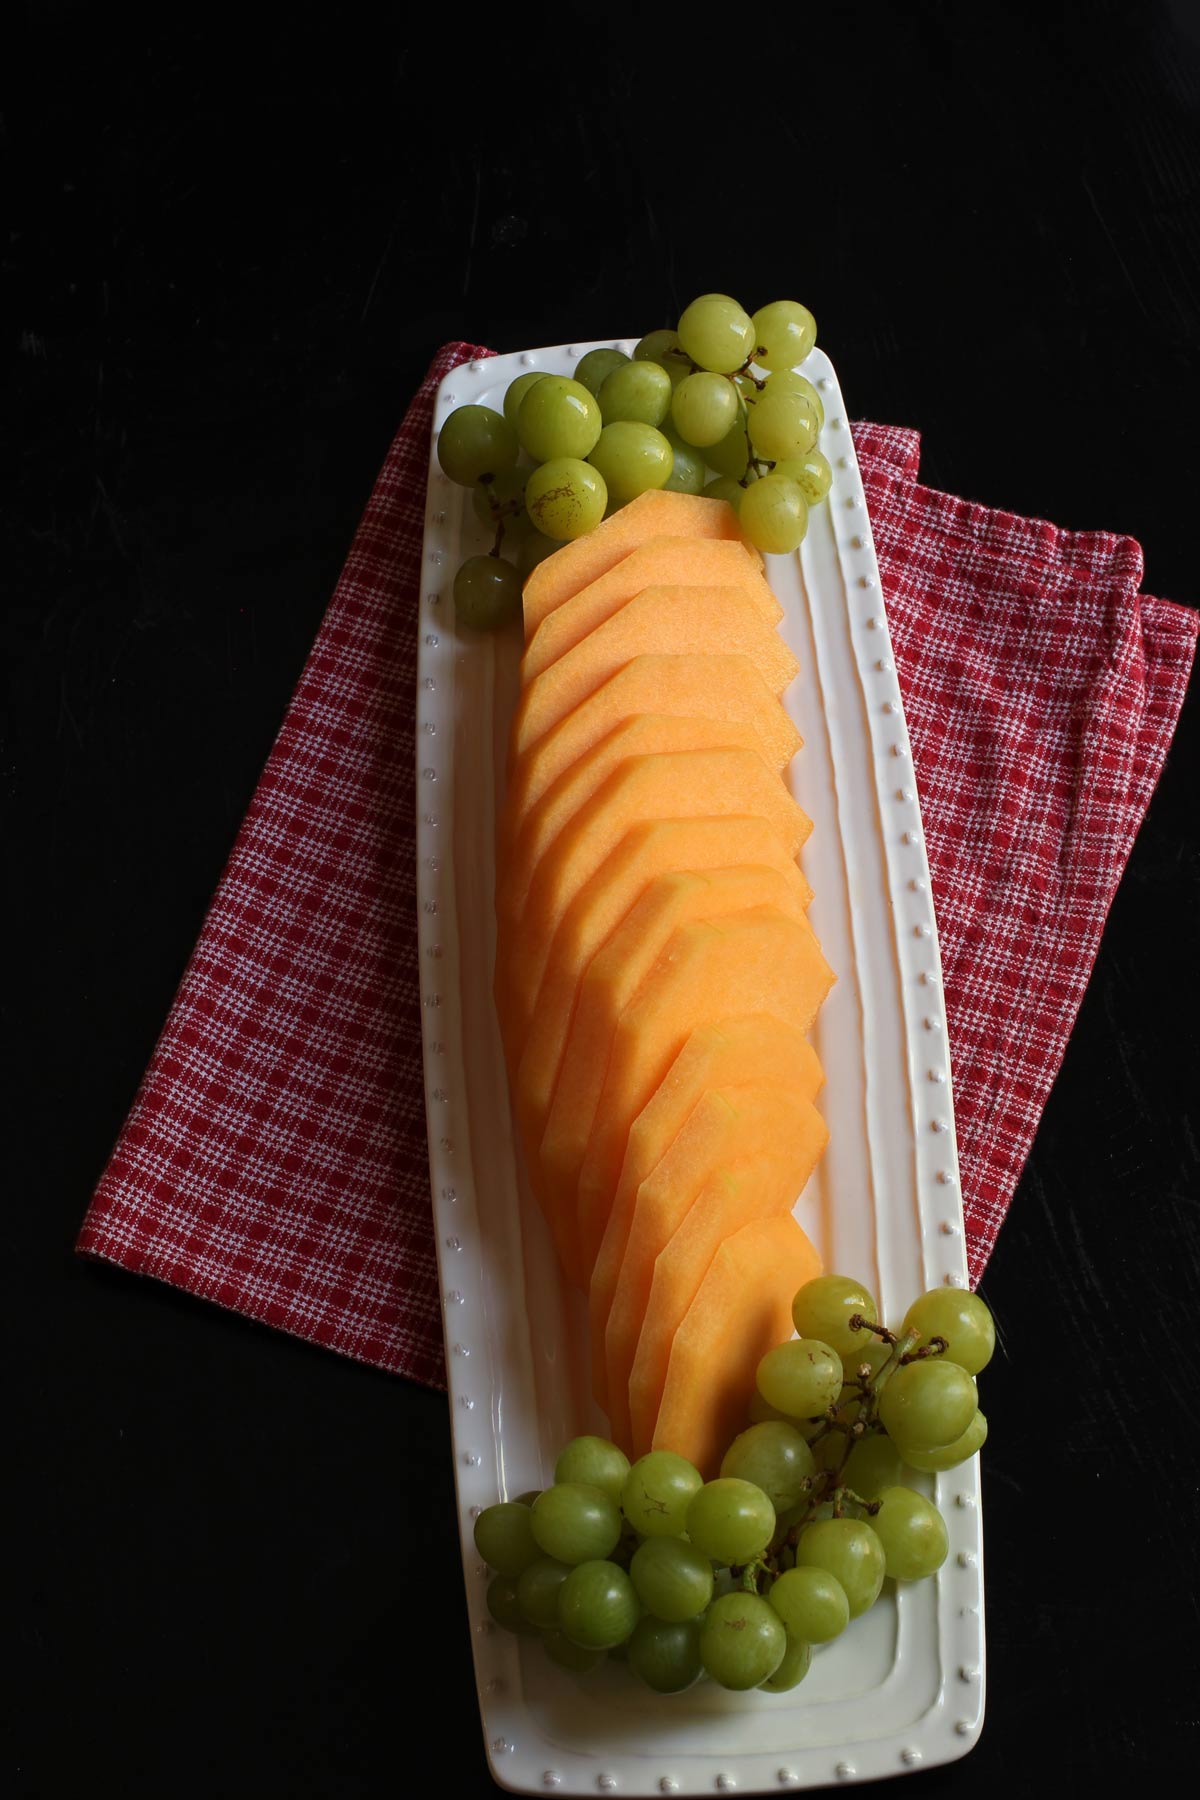 cantaloupe slices on tray with clusters of green grapes.